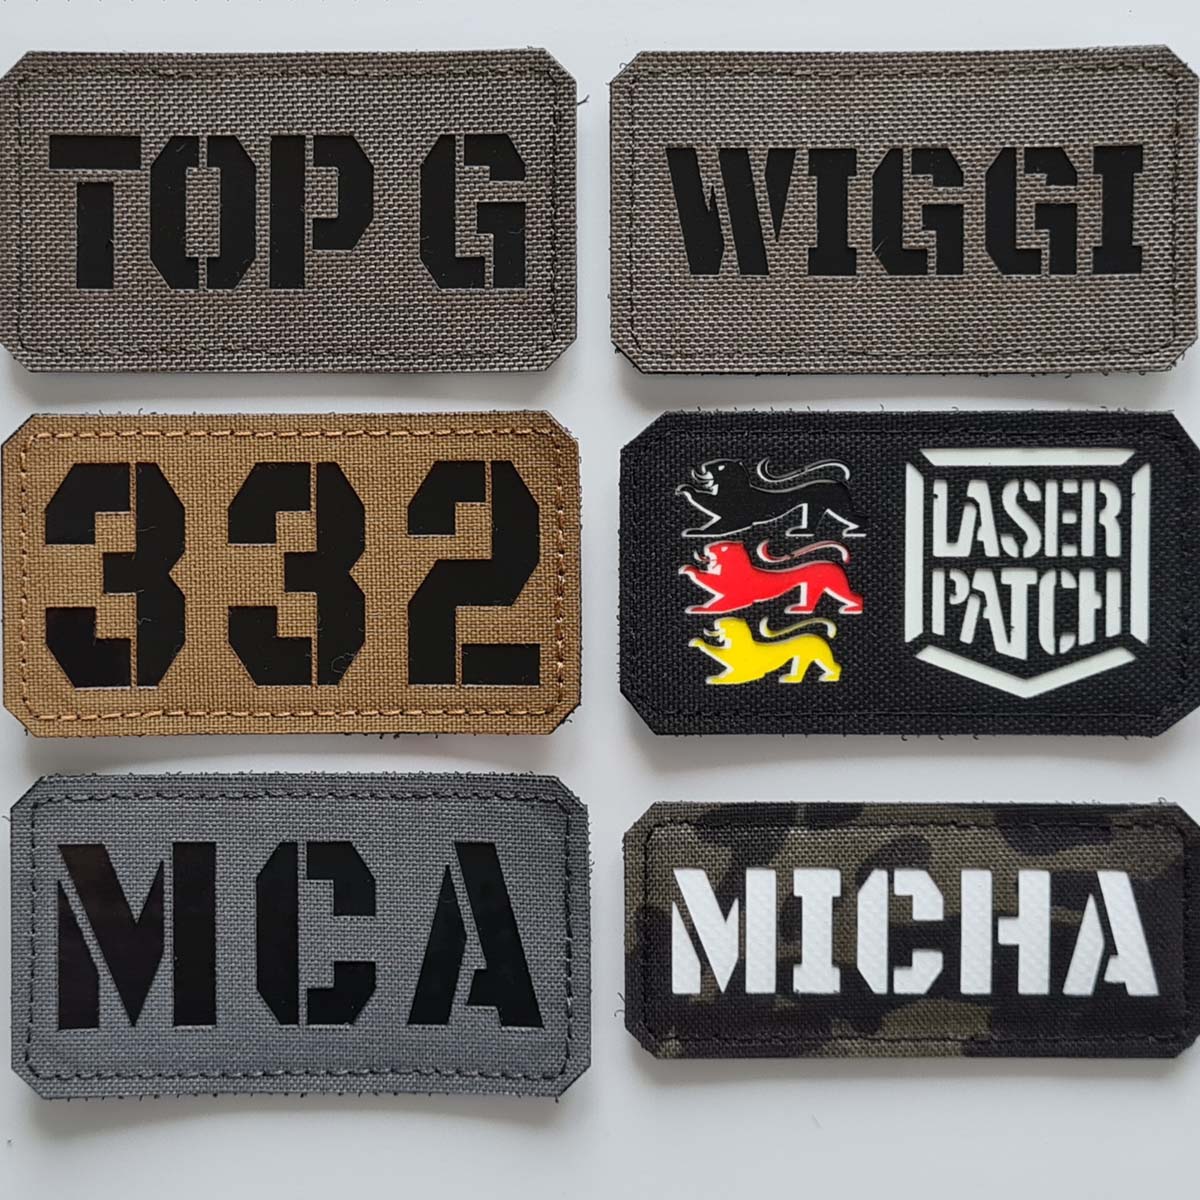 kaufen Callsign Name Army Laser Cut Patch